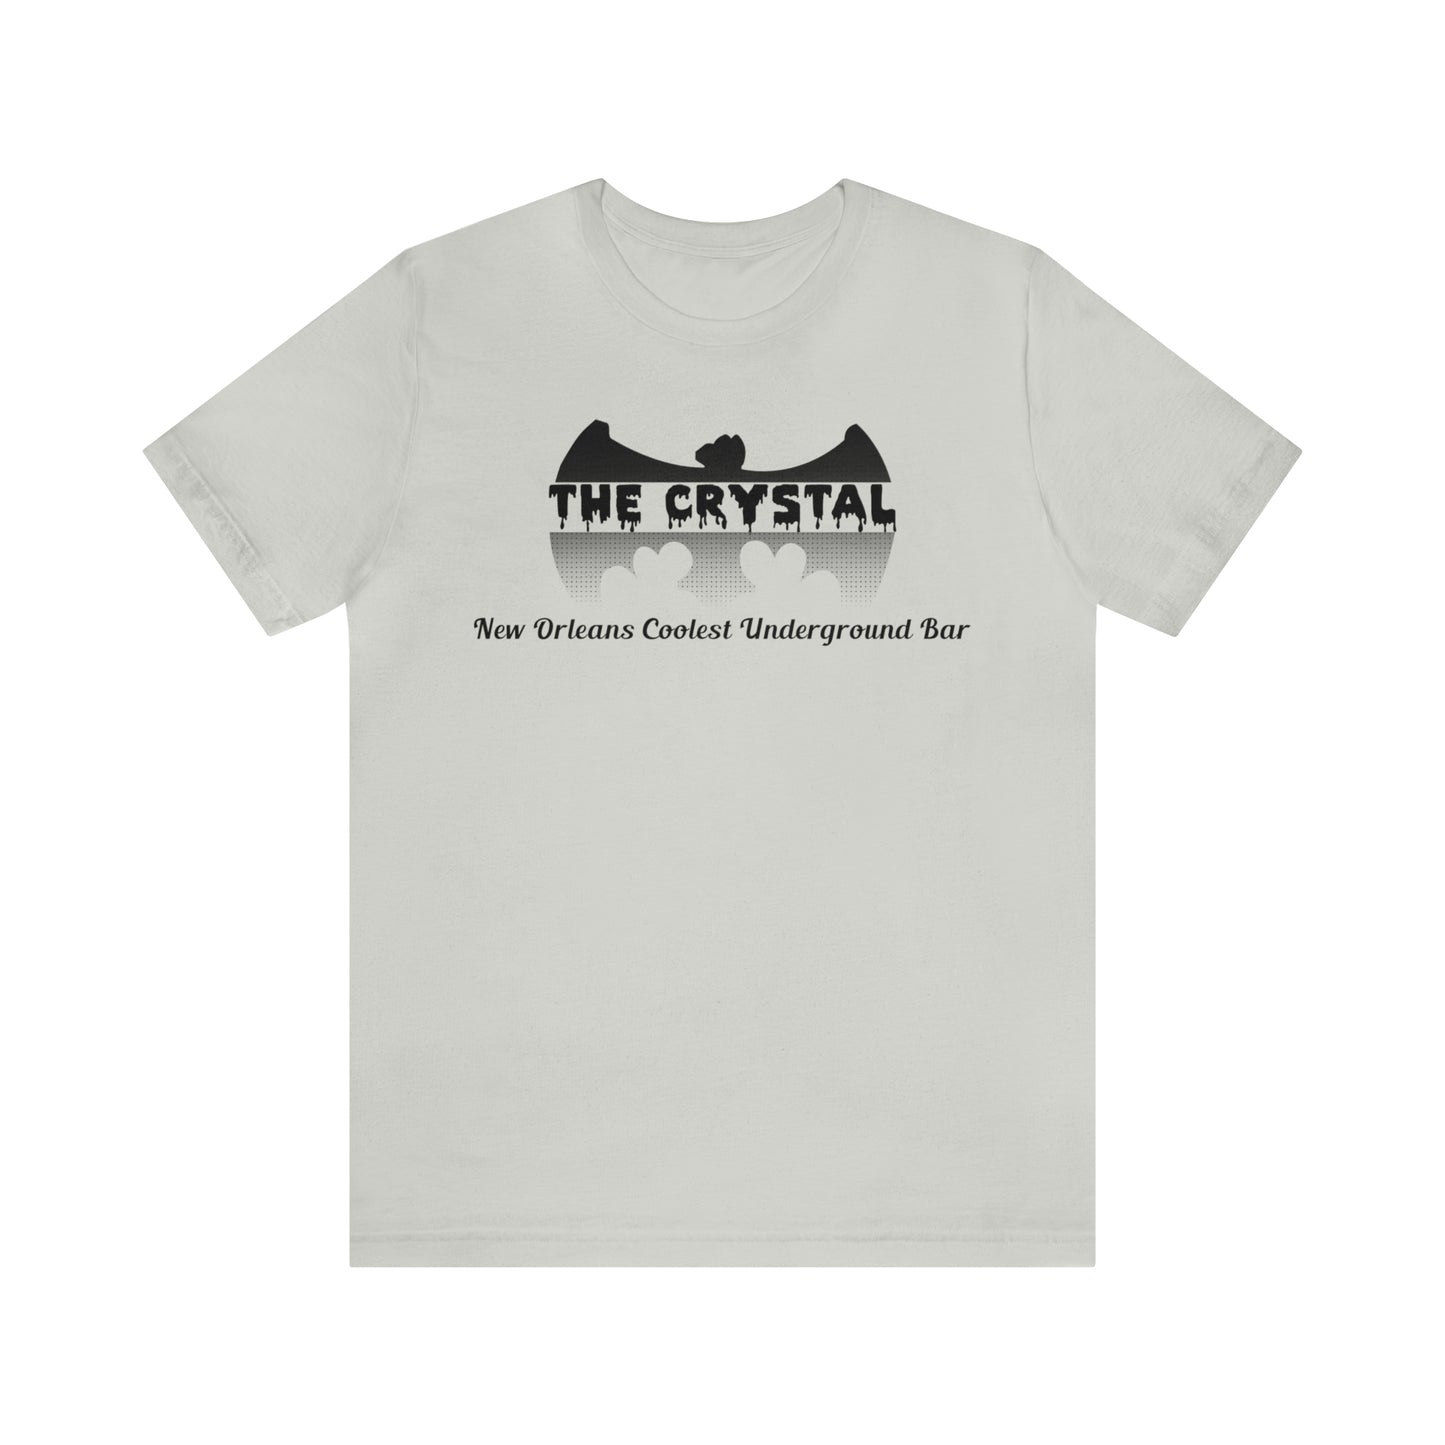 The Blue Crystal New Orleans Coolest Underground Bar Shirt